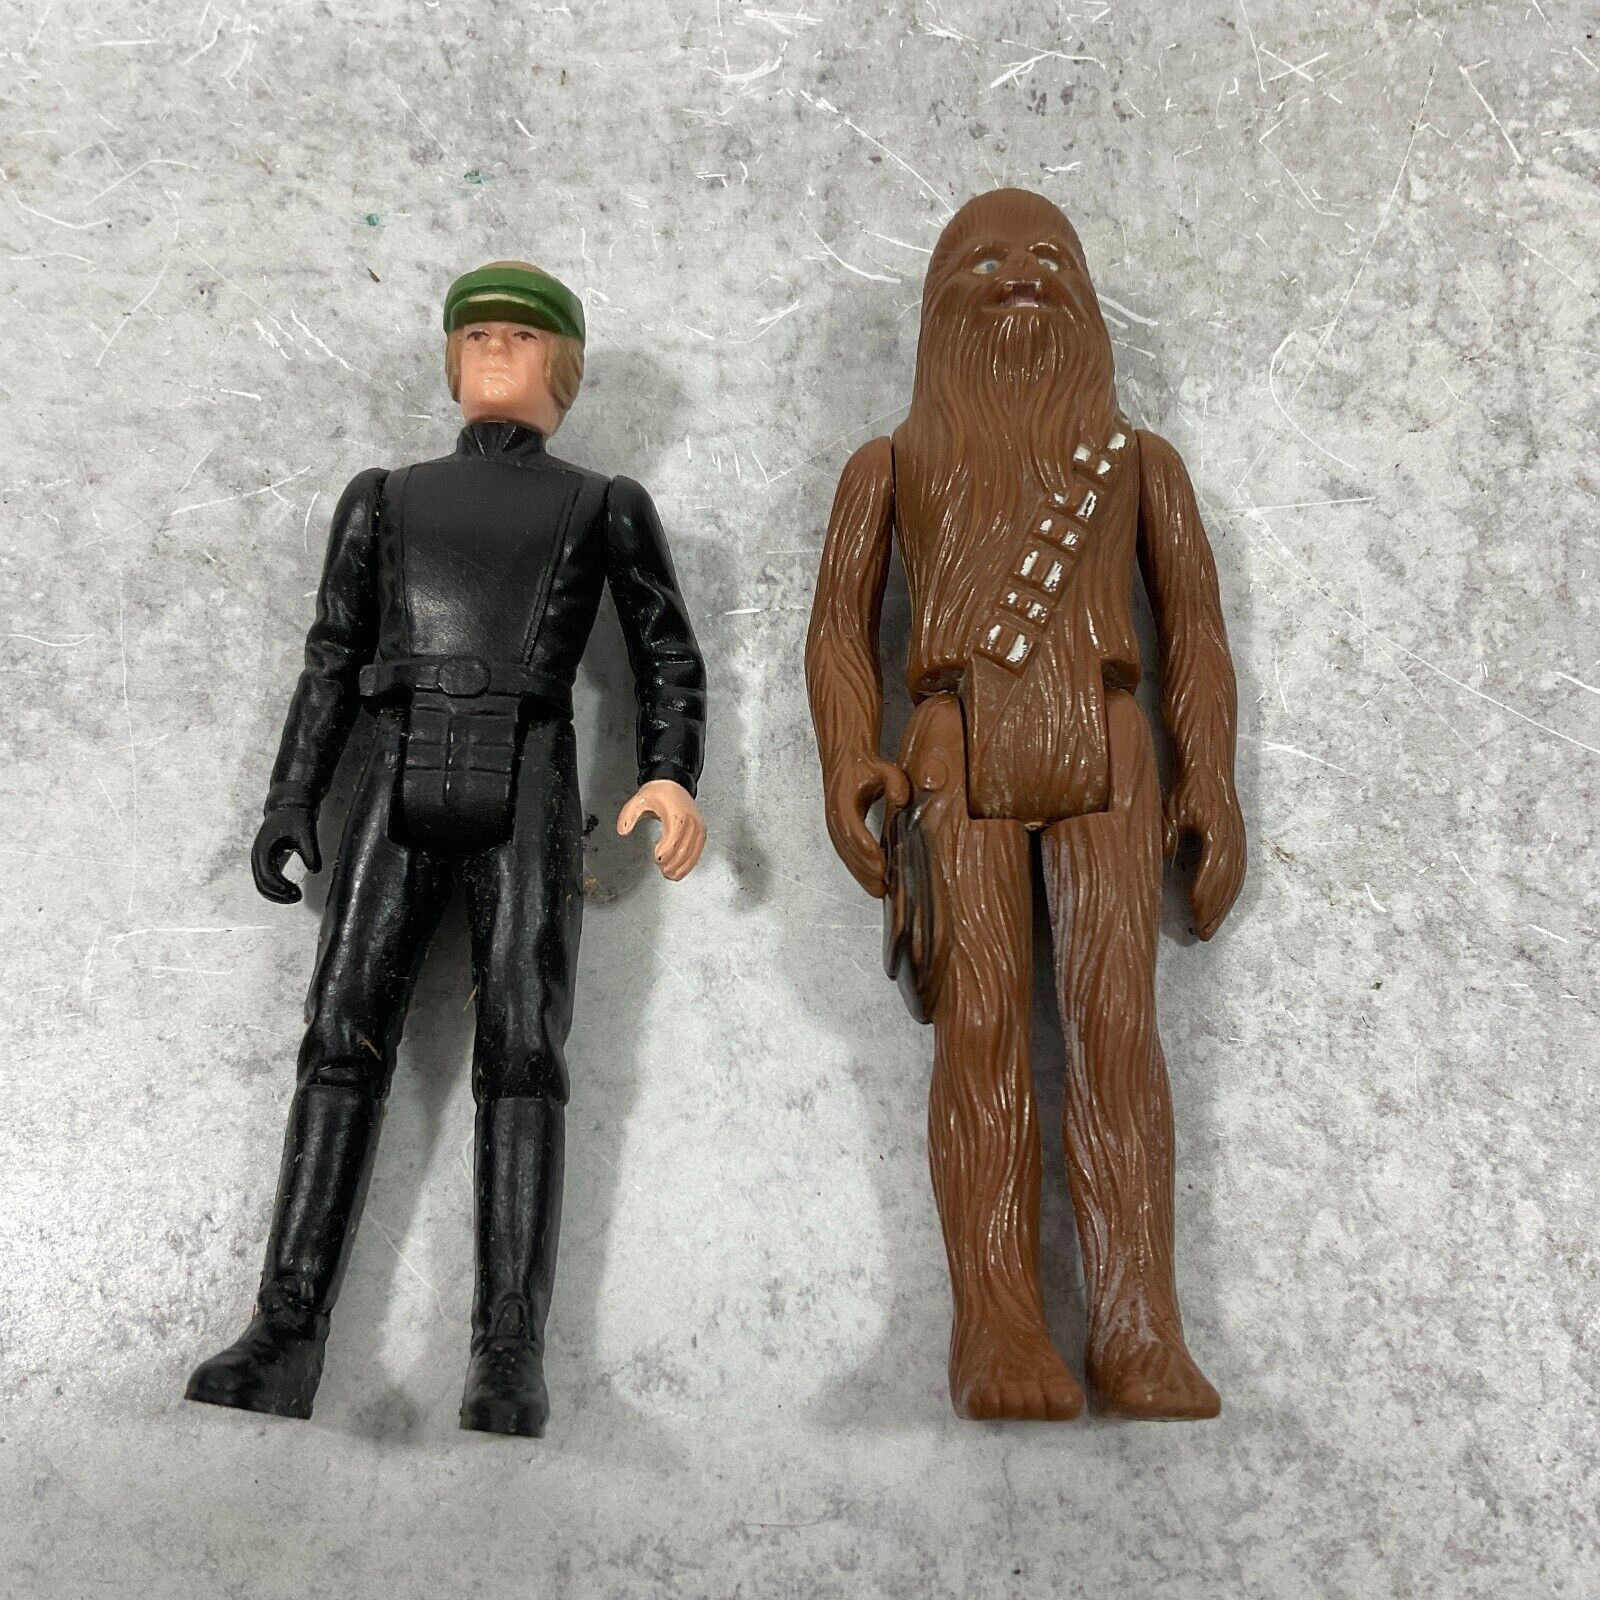 1977 Kenner Star Wars Chewbacca 1980 Imperial Commander Action Figures